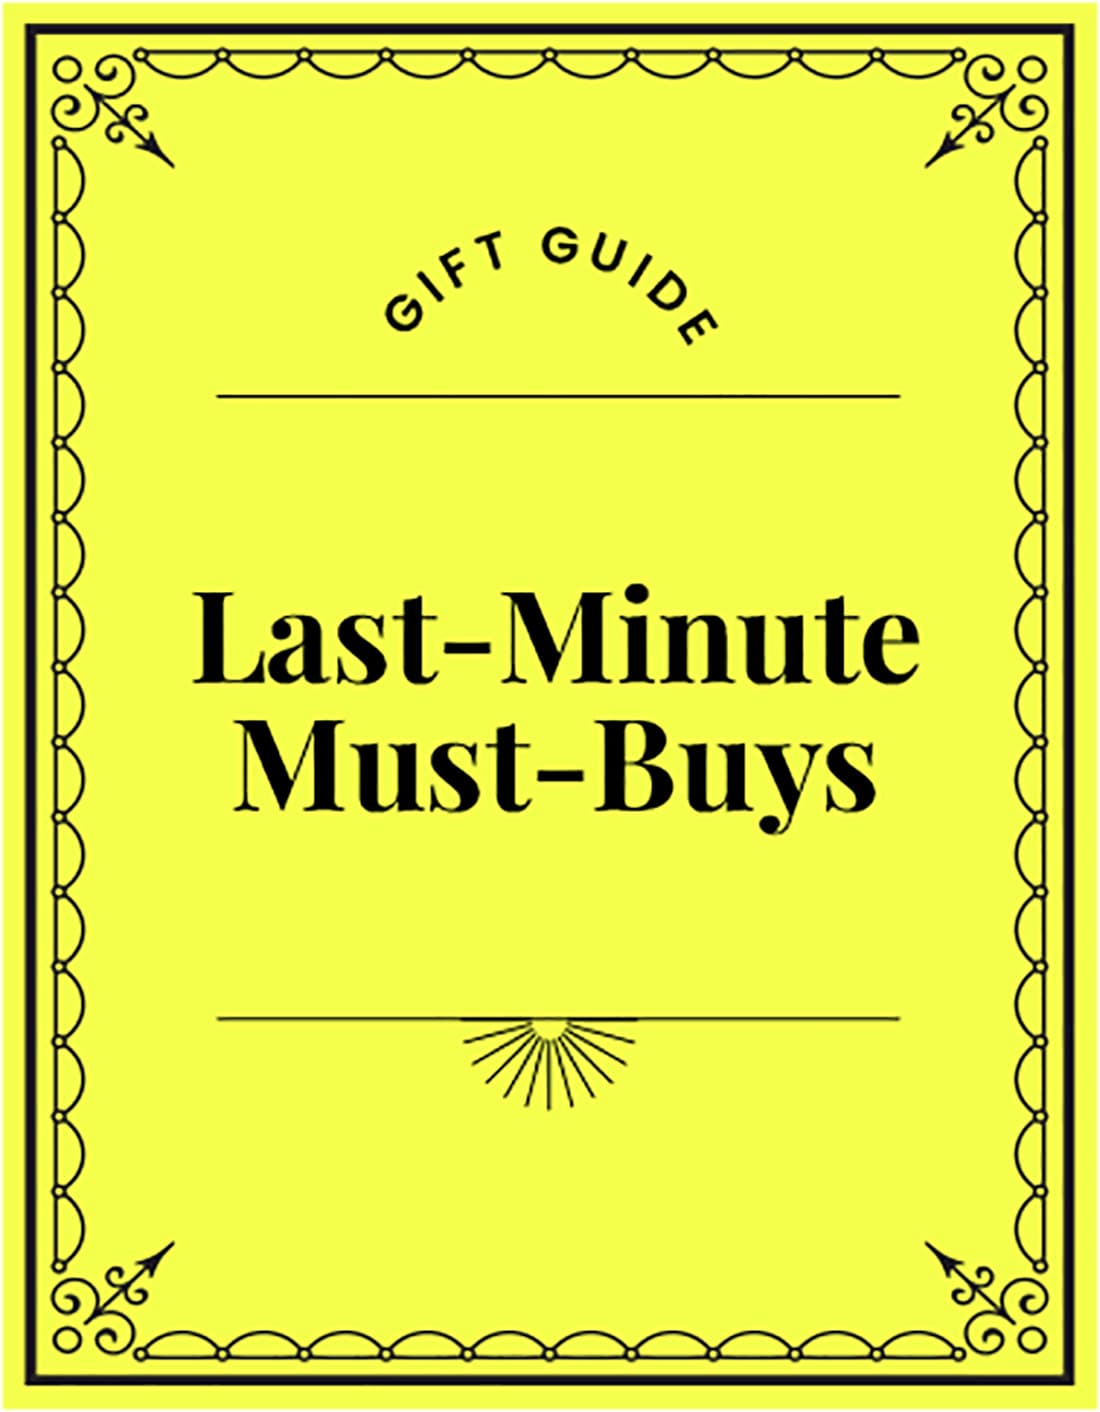 Gift Guide. Last-Minute Must-Buys.